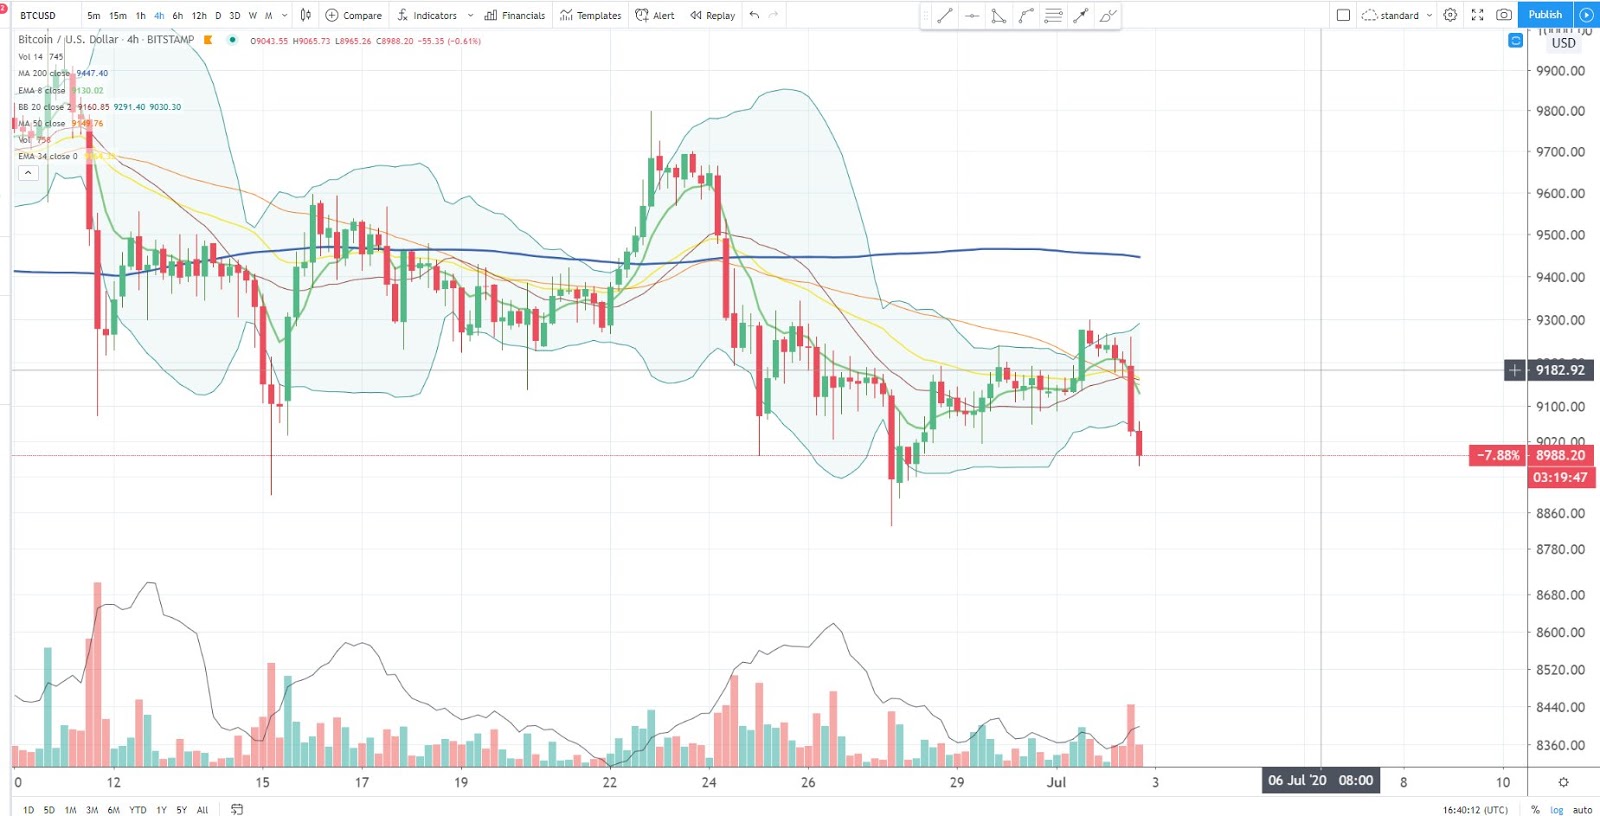 A 4-hour chart of Bitcoin with a Bollinger Band